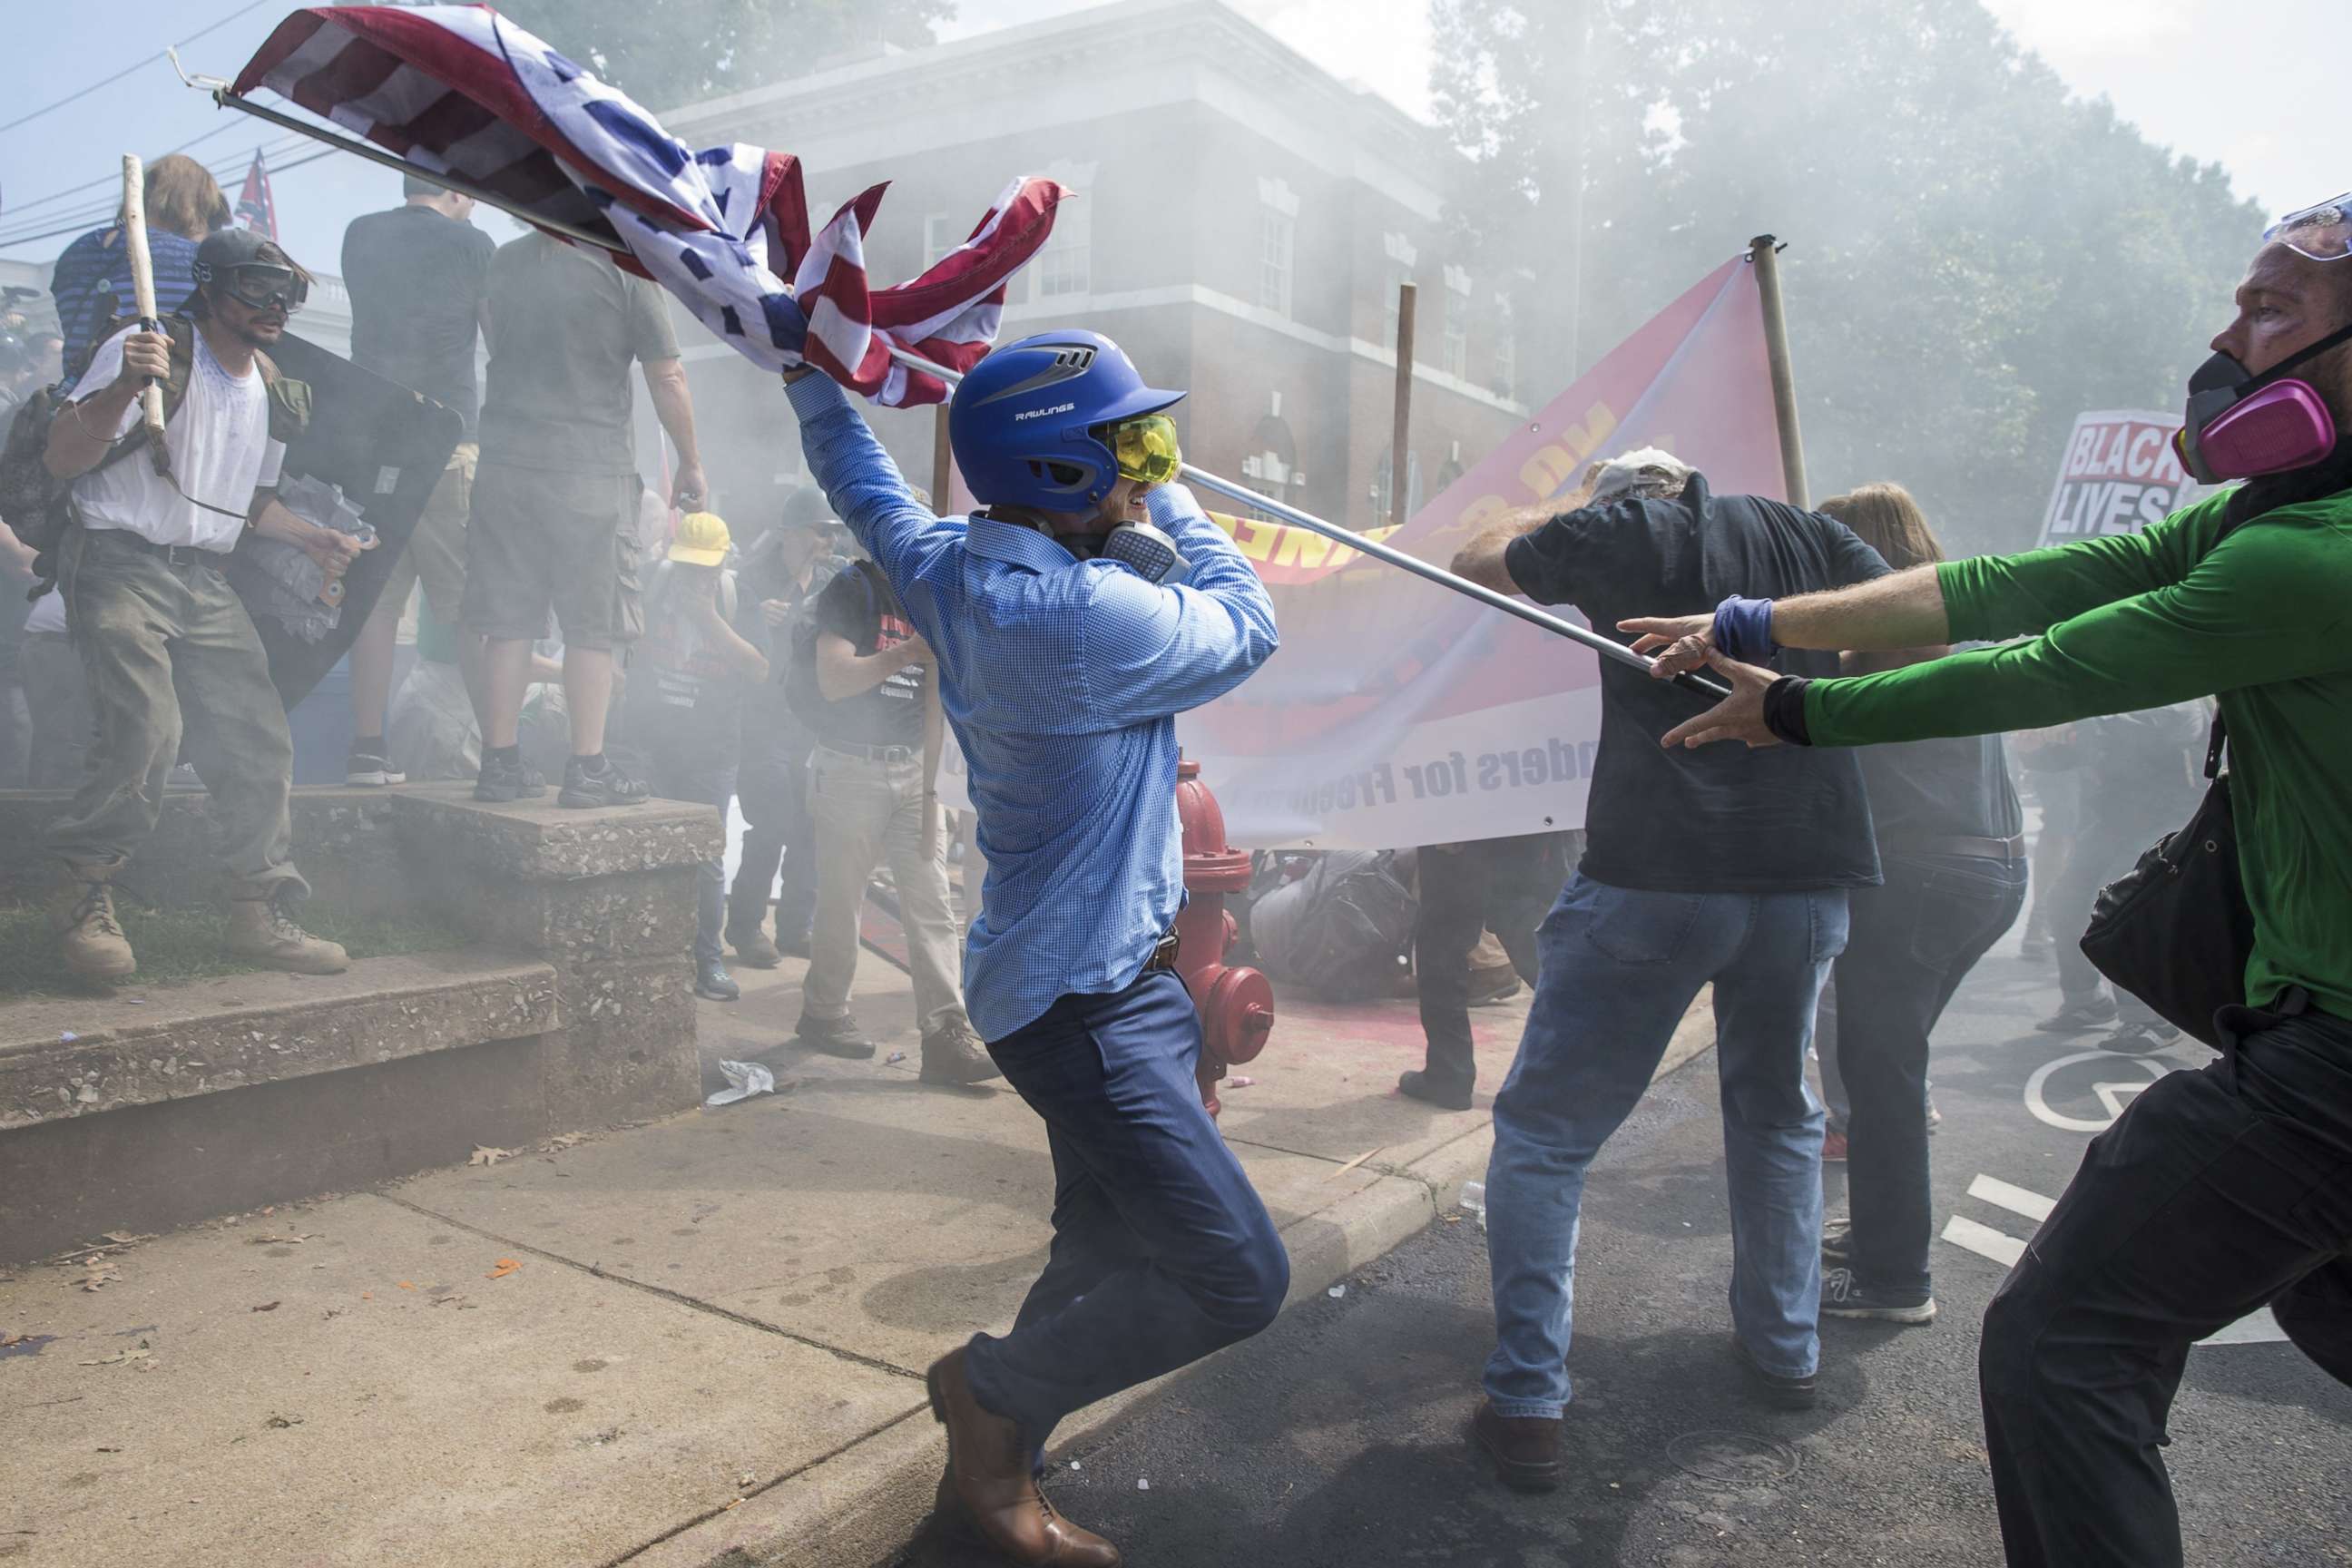 PHOTO: A white supremacist tries to strike a counter-protester with a flag during clashes at Emancipation Park where the White Nationalists are protesting the removal of the Robert E. Lee monument in Charlottesville, Va., Aug. 12, 2017.